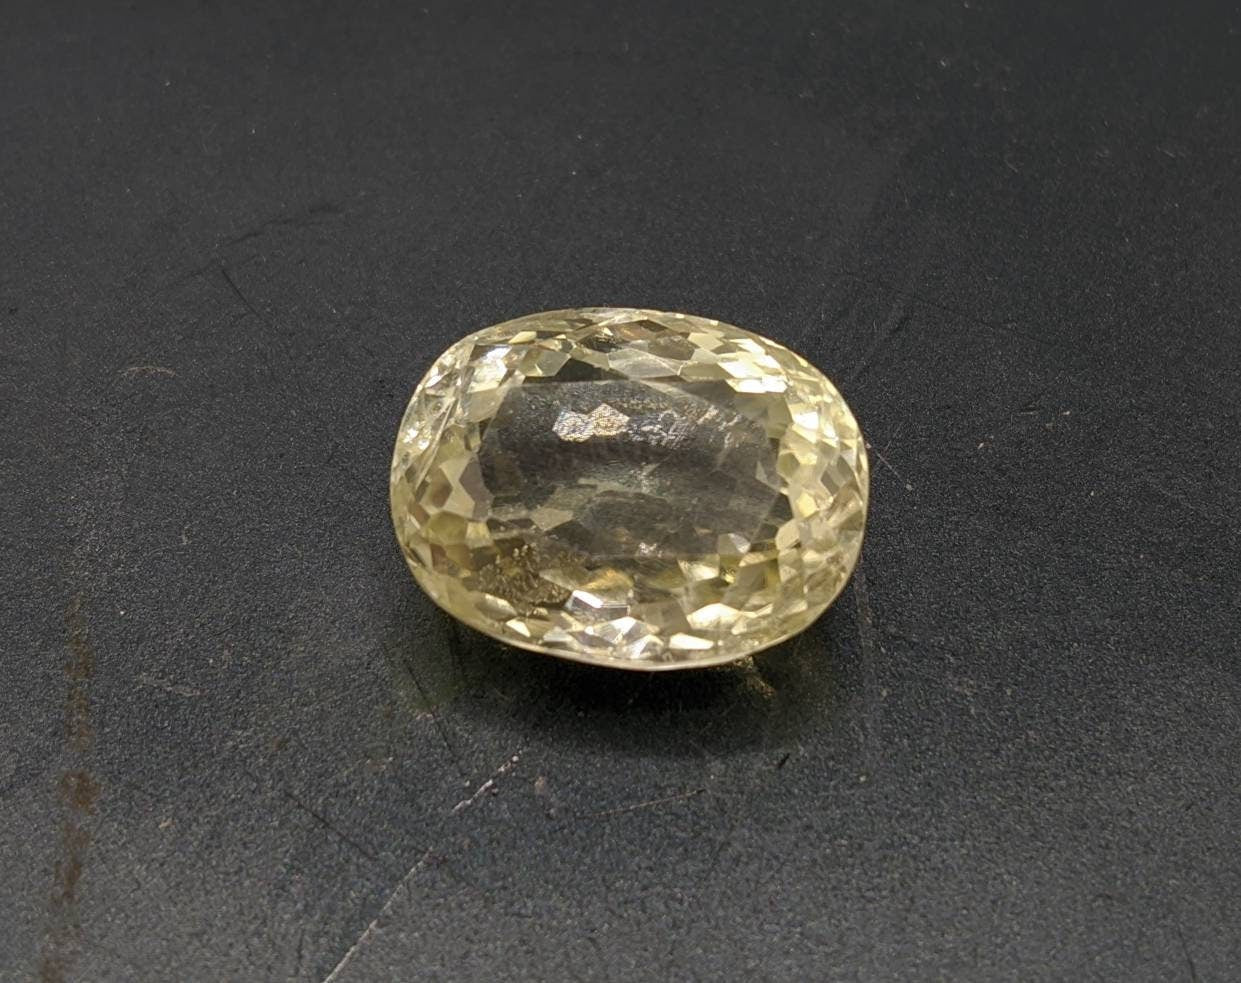 ARSAA GEMS AND MINERALSFaceted beautiful 12 carats yellow triphane/kunzite gem from Afghanistan - Premium  from ARSAA GEMS AND MINERALS - Just $24.00! Shop now at ARSAA GEMS AND MINERALS